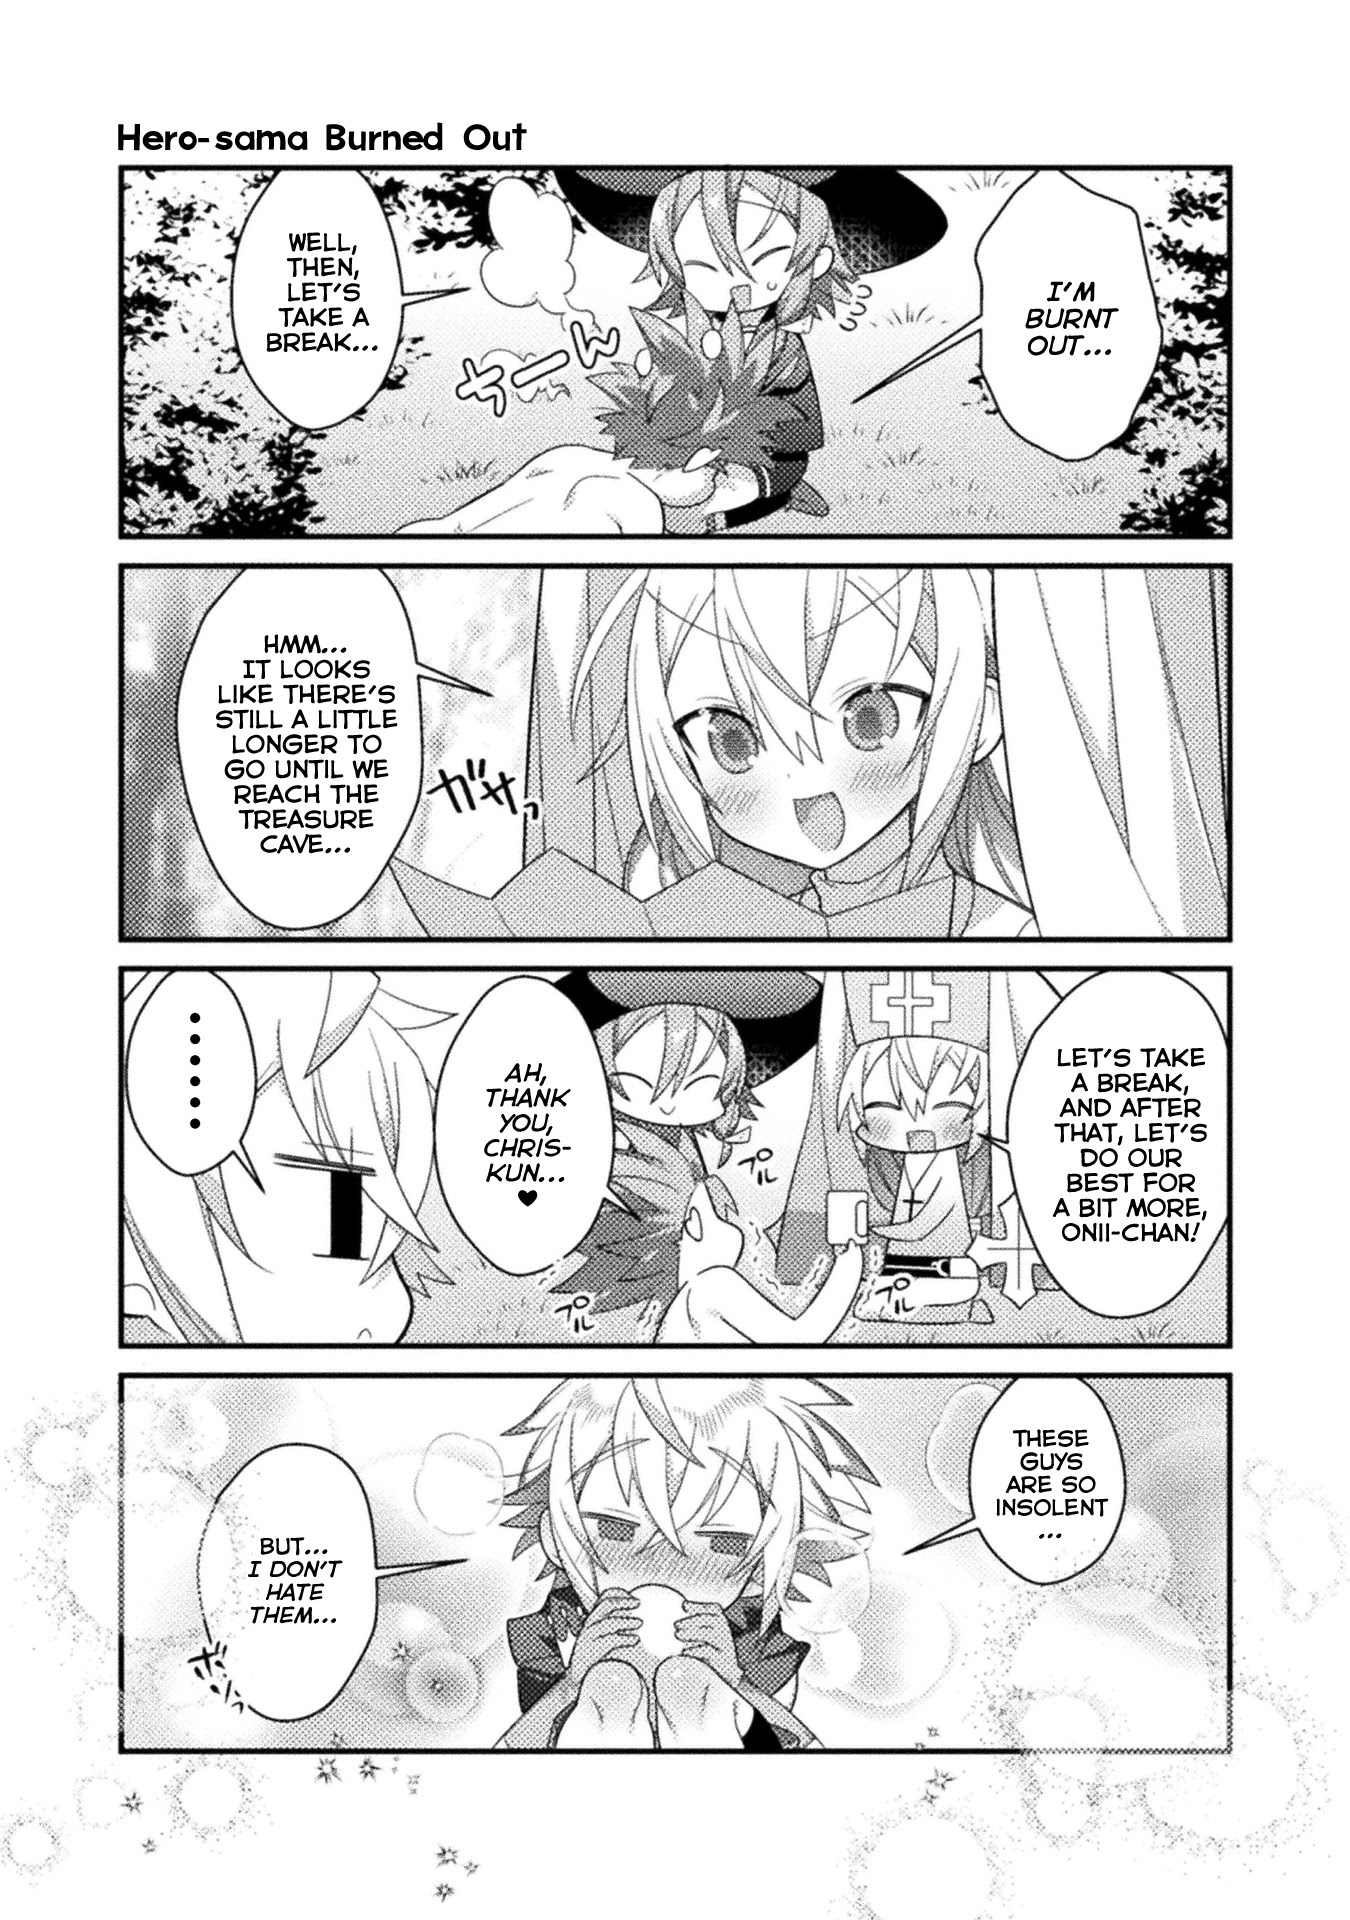 After Reincarnation, My Party Was Full Of Traps, But I'm Not A Shotacon! - 12 page 7